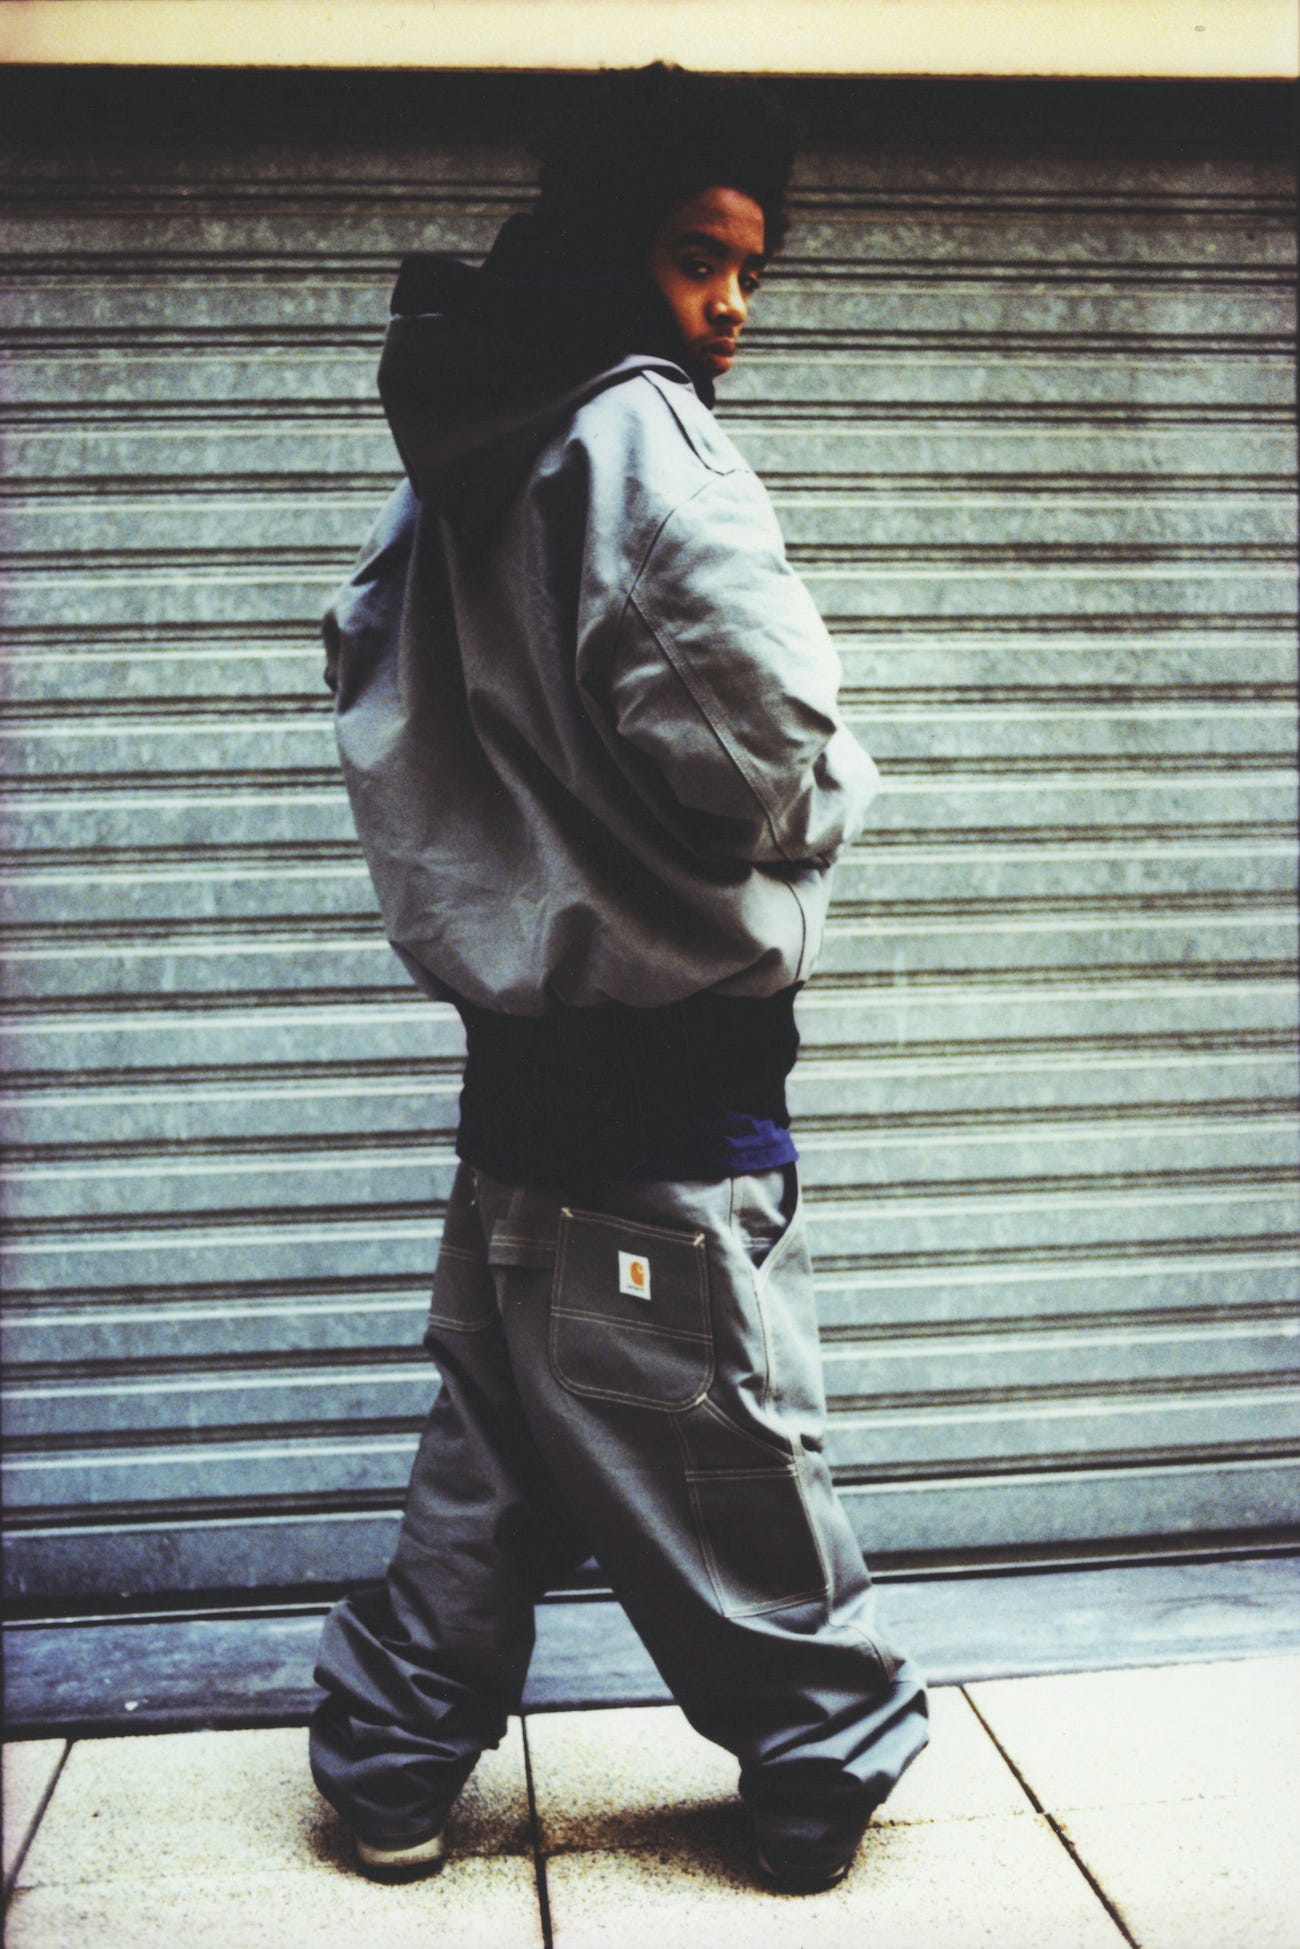 Carhartt WIP - Shyheim, an affiliate of the Wu-Tang Clan, photographed by Xavier De Nauw, mid-90s.